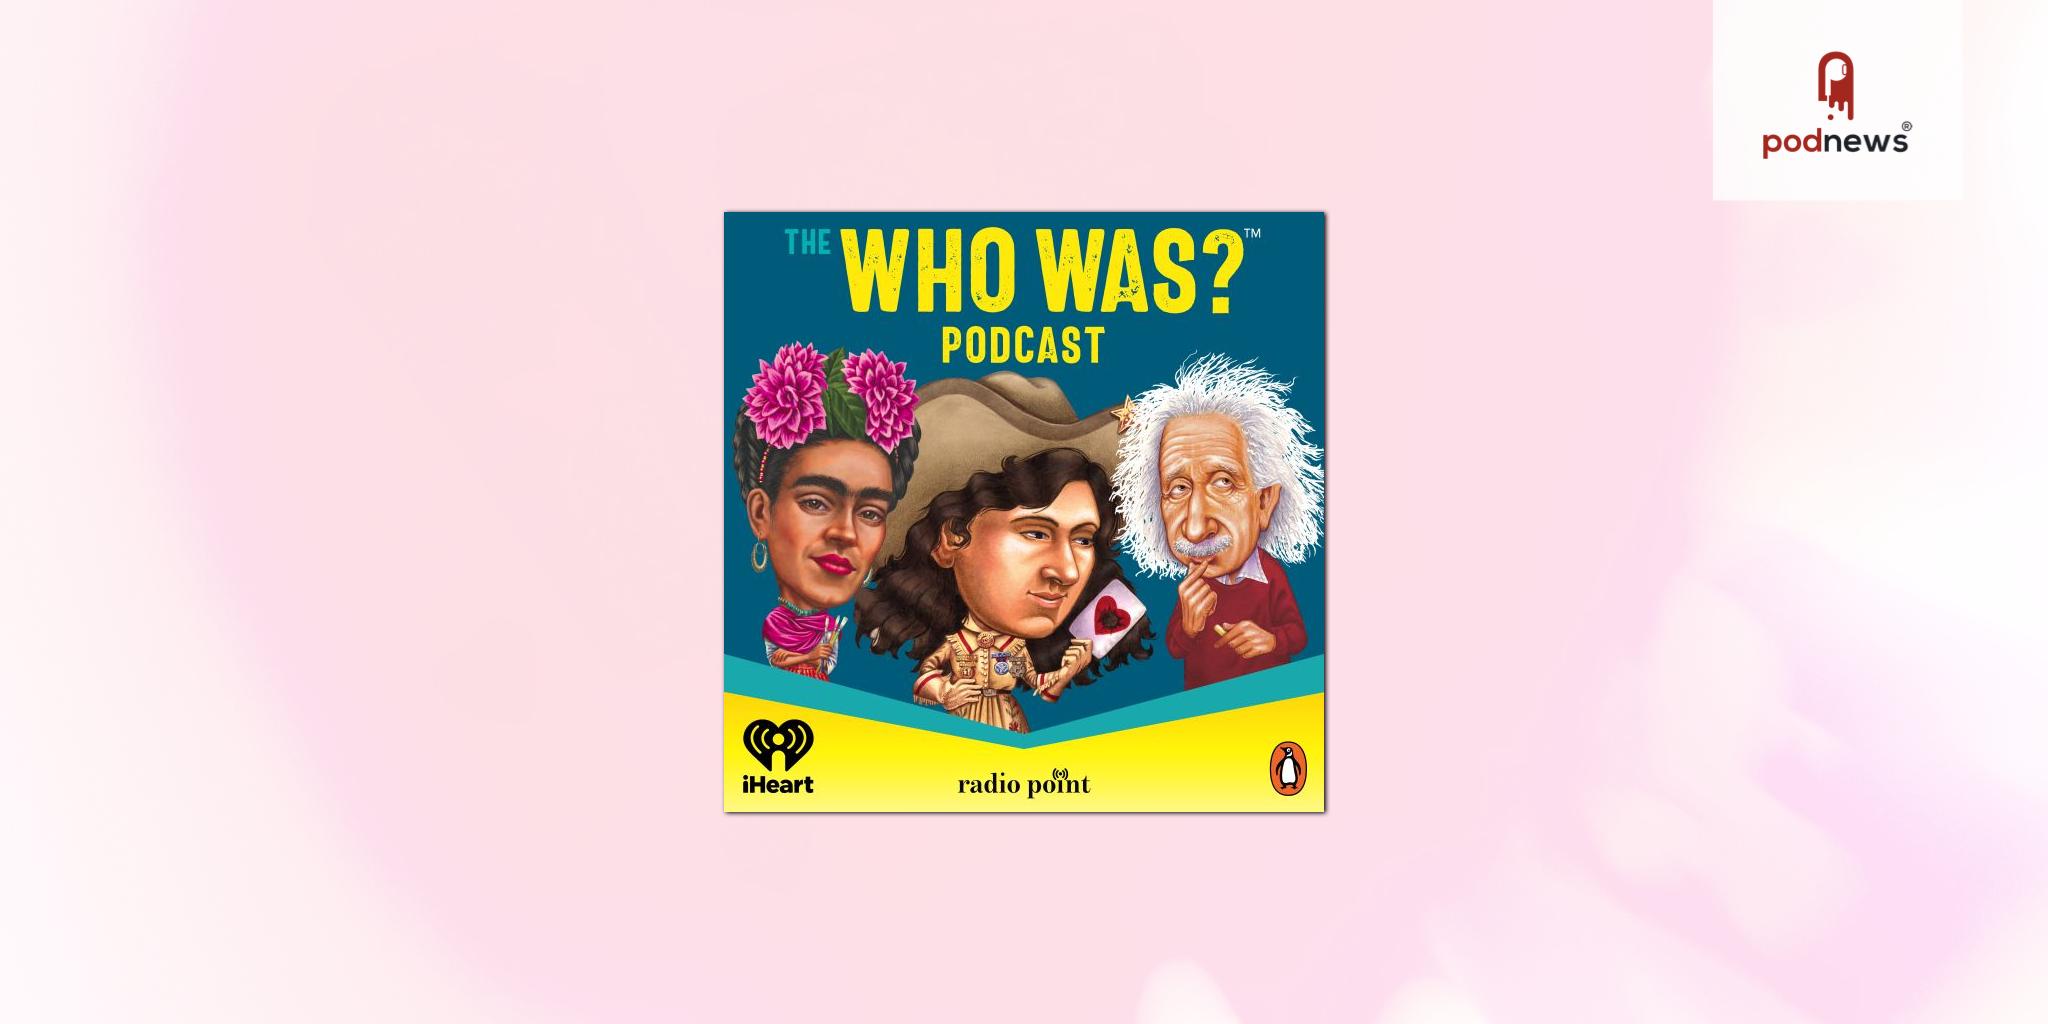 Penguin Workshop, iHeartMedia, And Radio Point Announce New Kids’ Comedy Quiz Show, The Who Was? Podcast